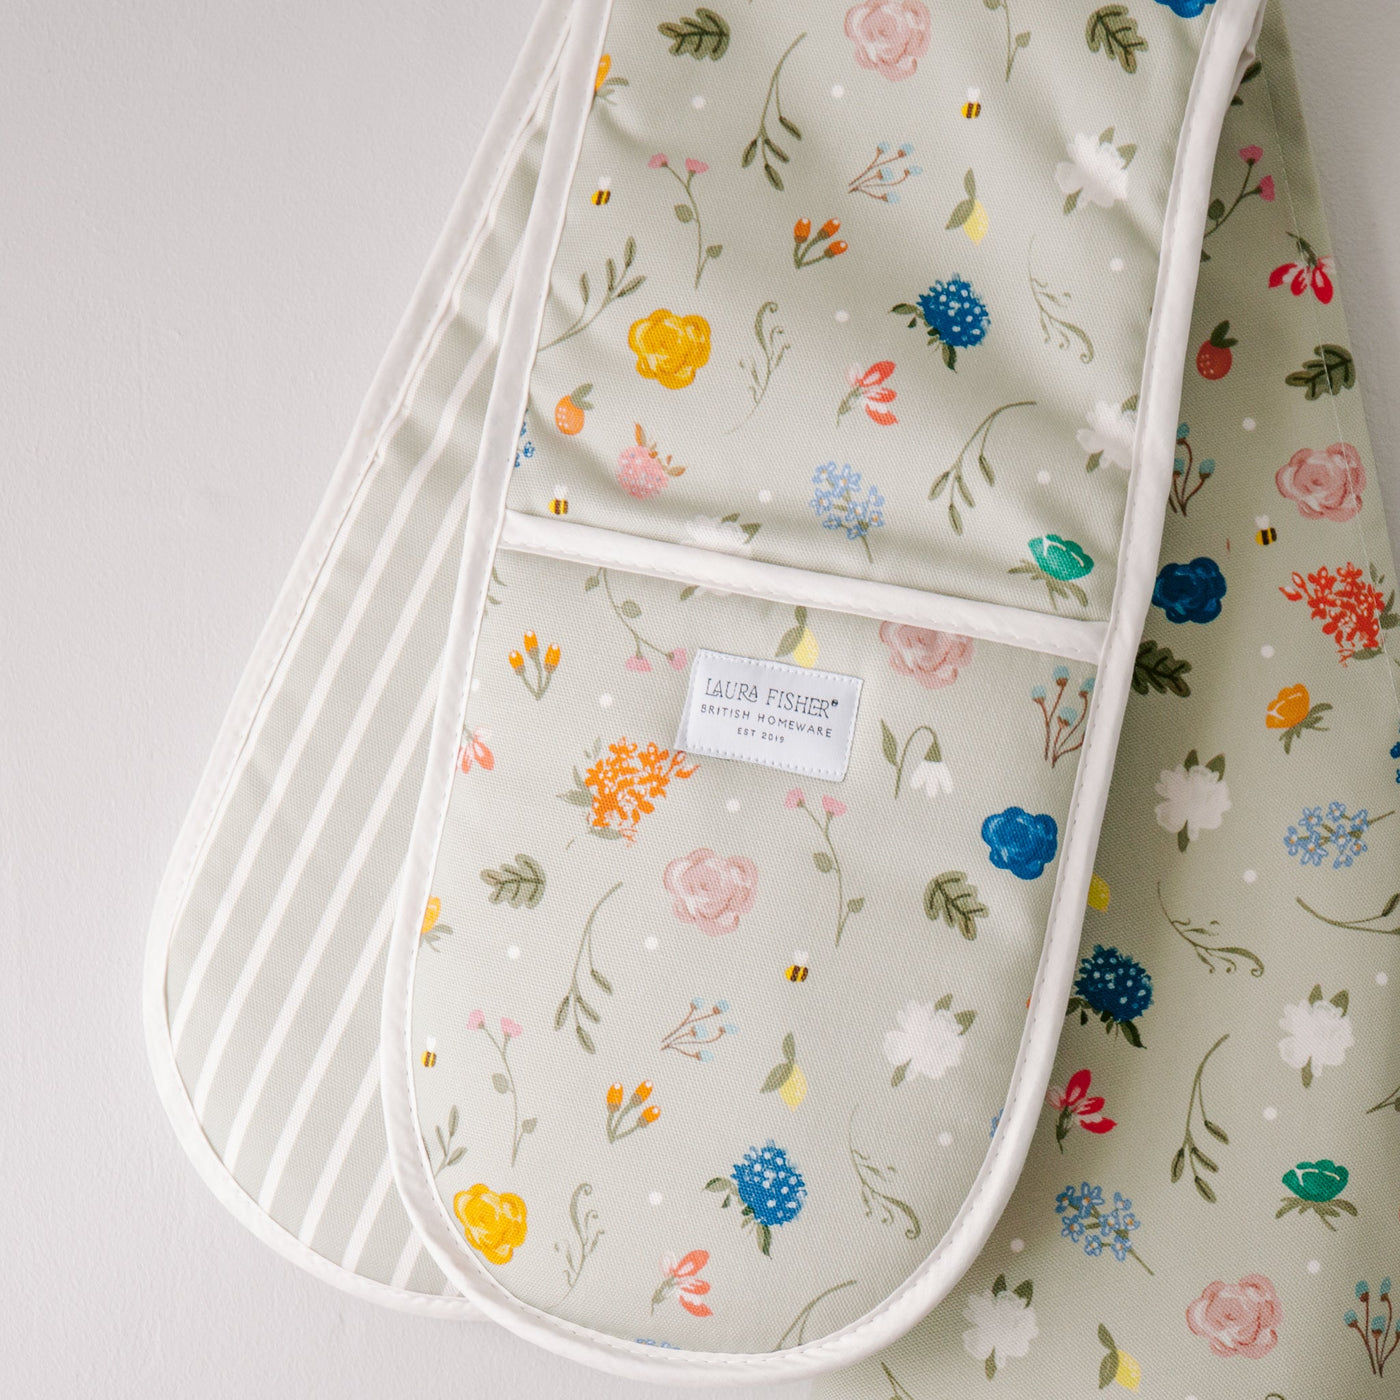 Floral Meadow Oven Glove